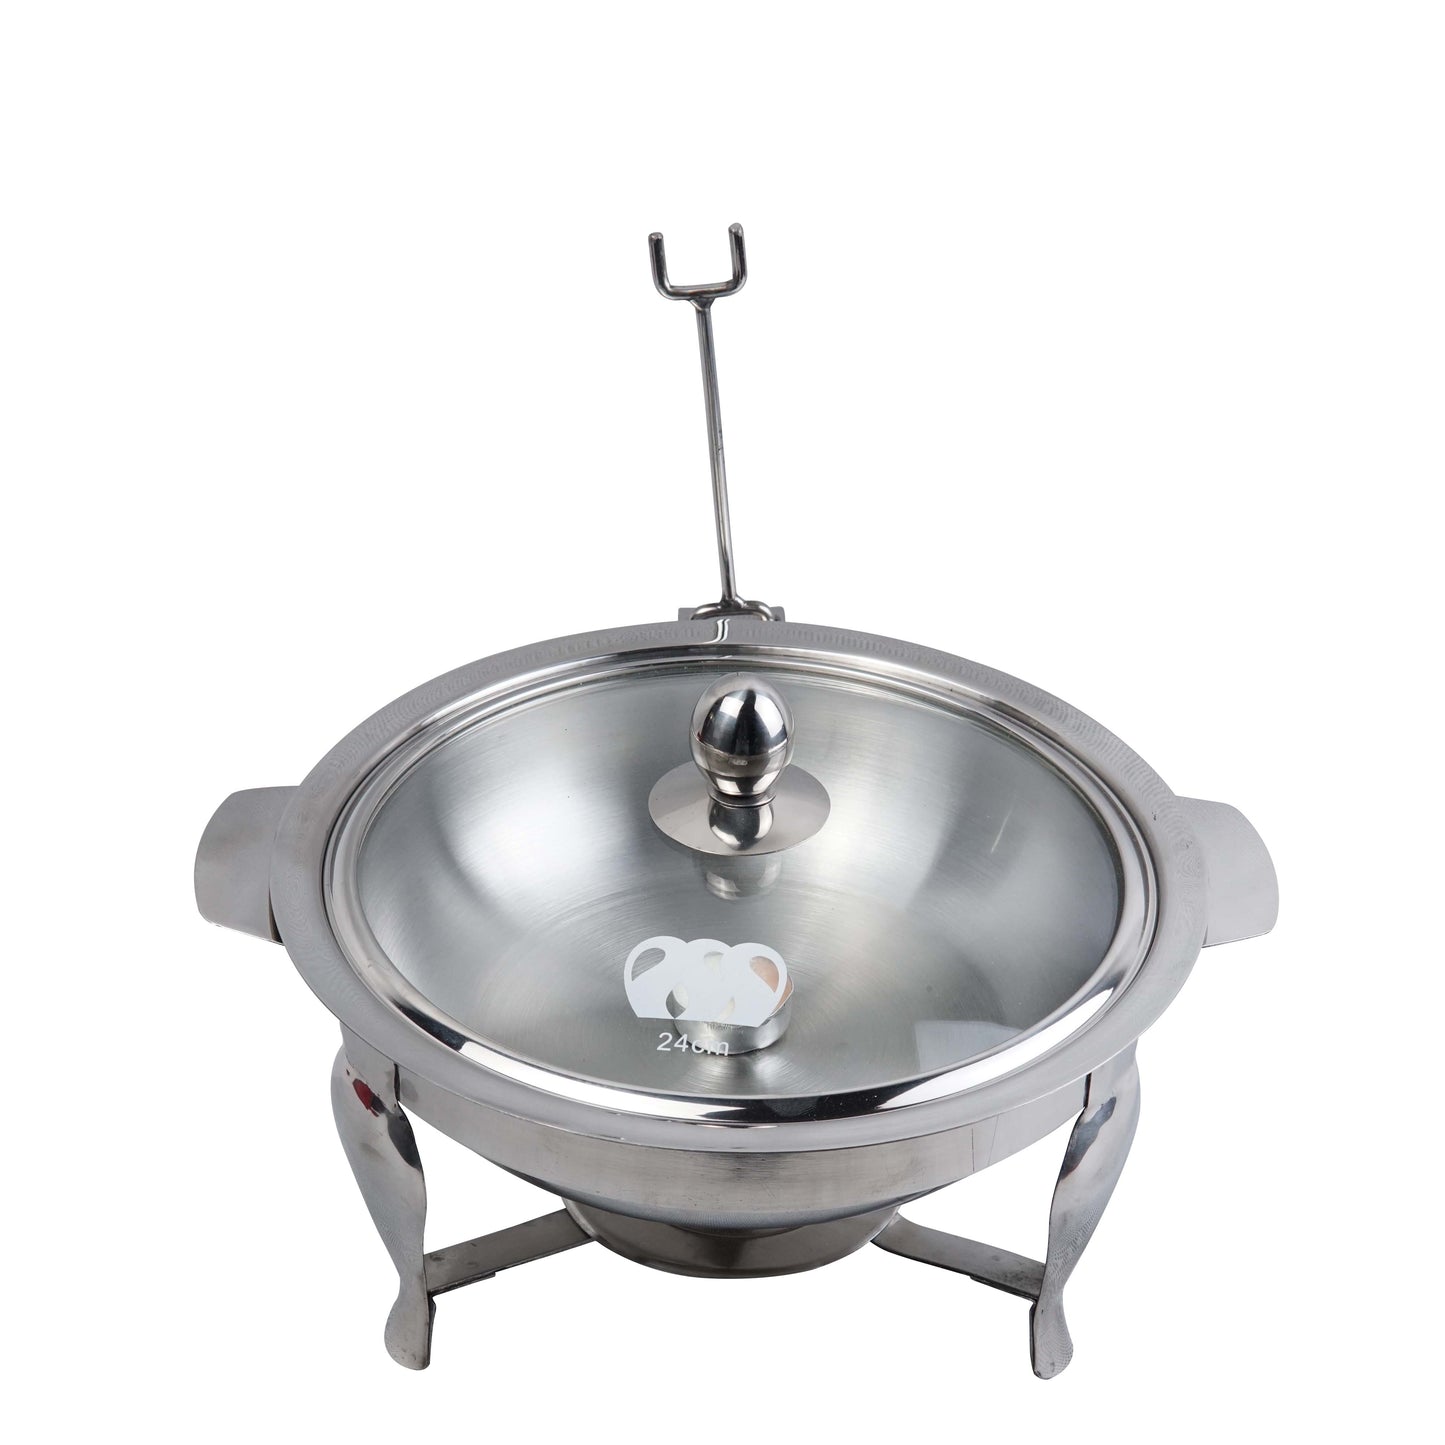 Stainless steel Chafing Dish, Food Warming Buffet Serving Pot Design 01 (24cm) with Tealight Candle